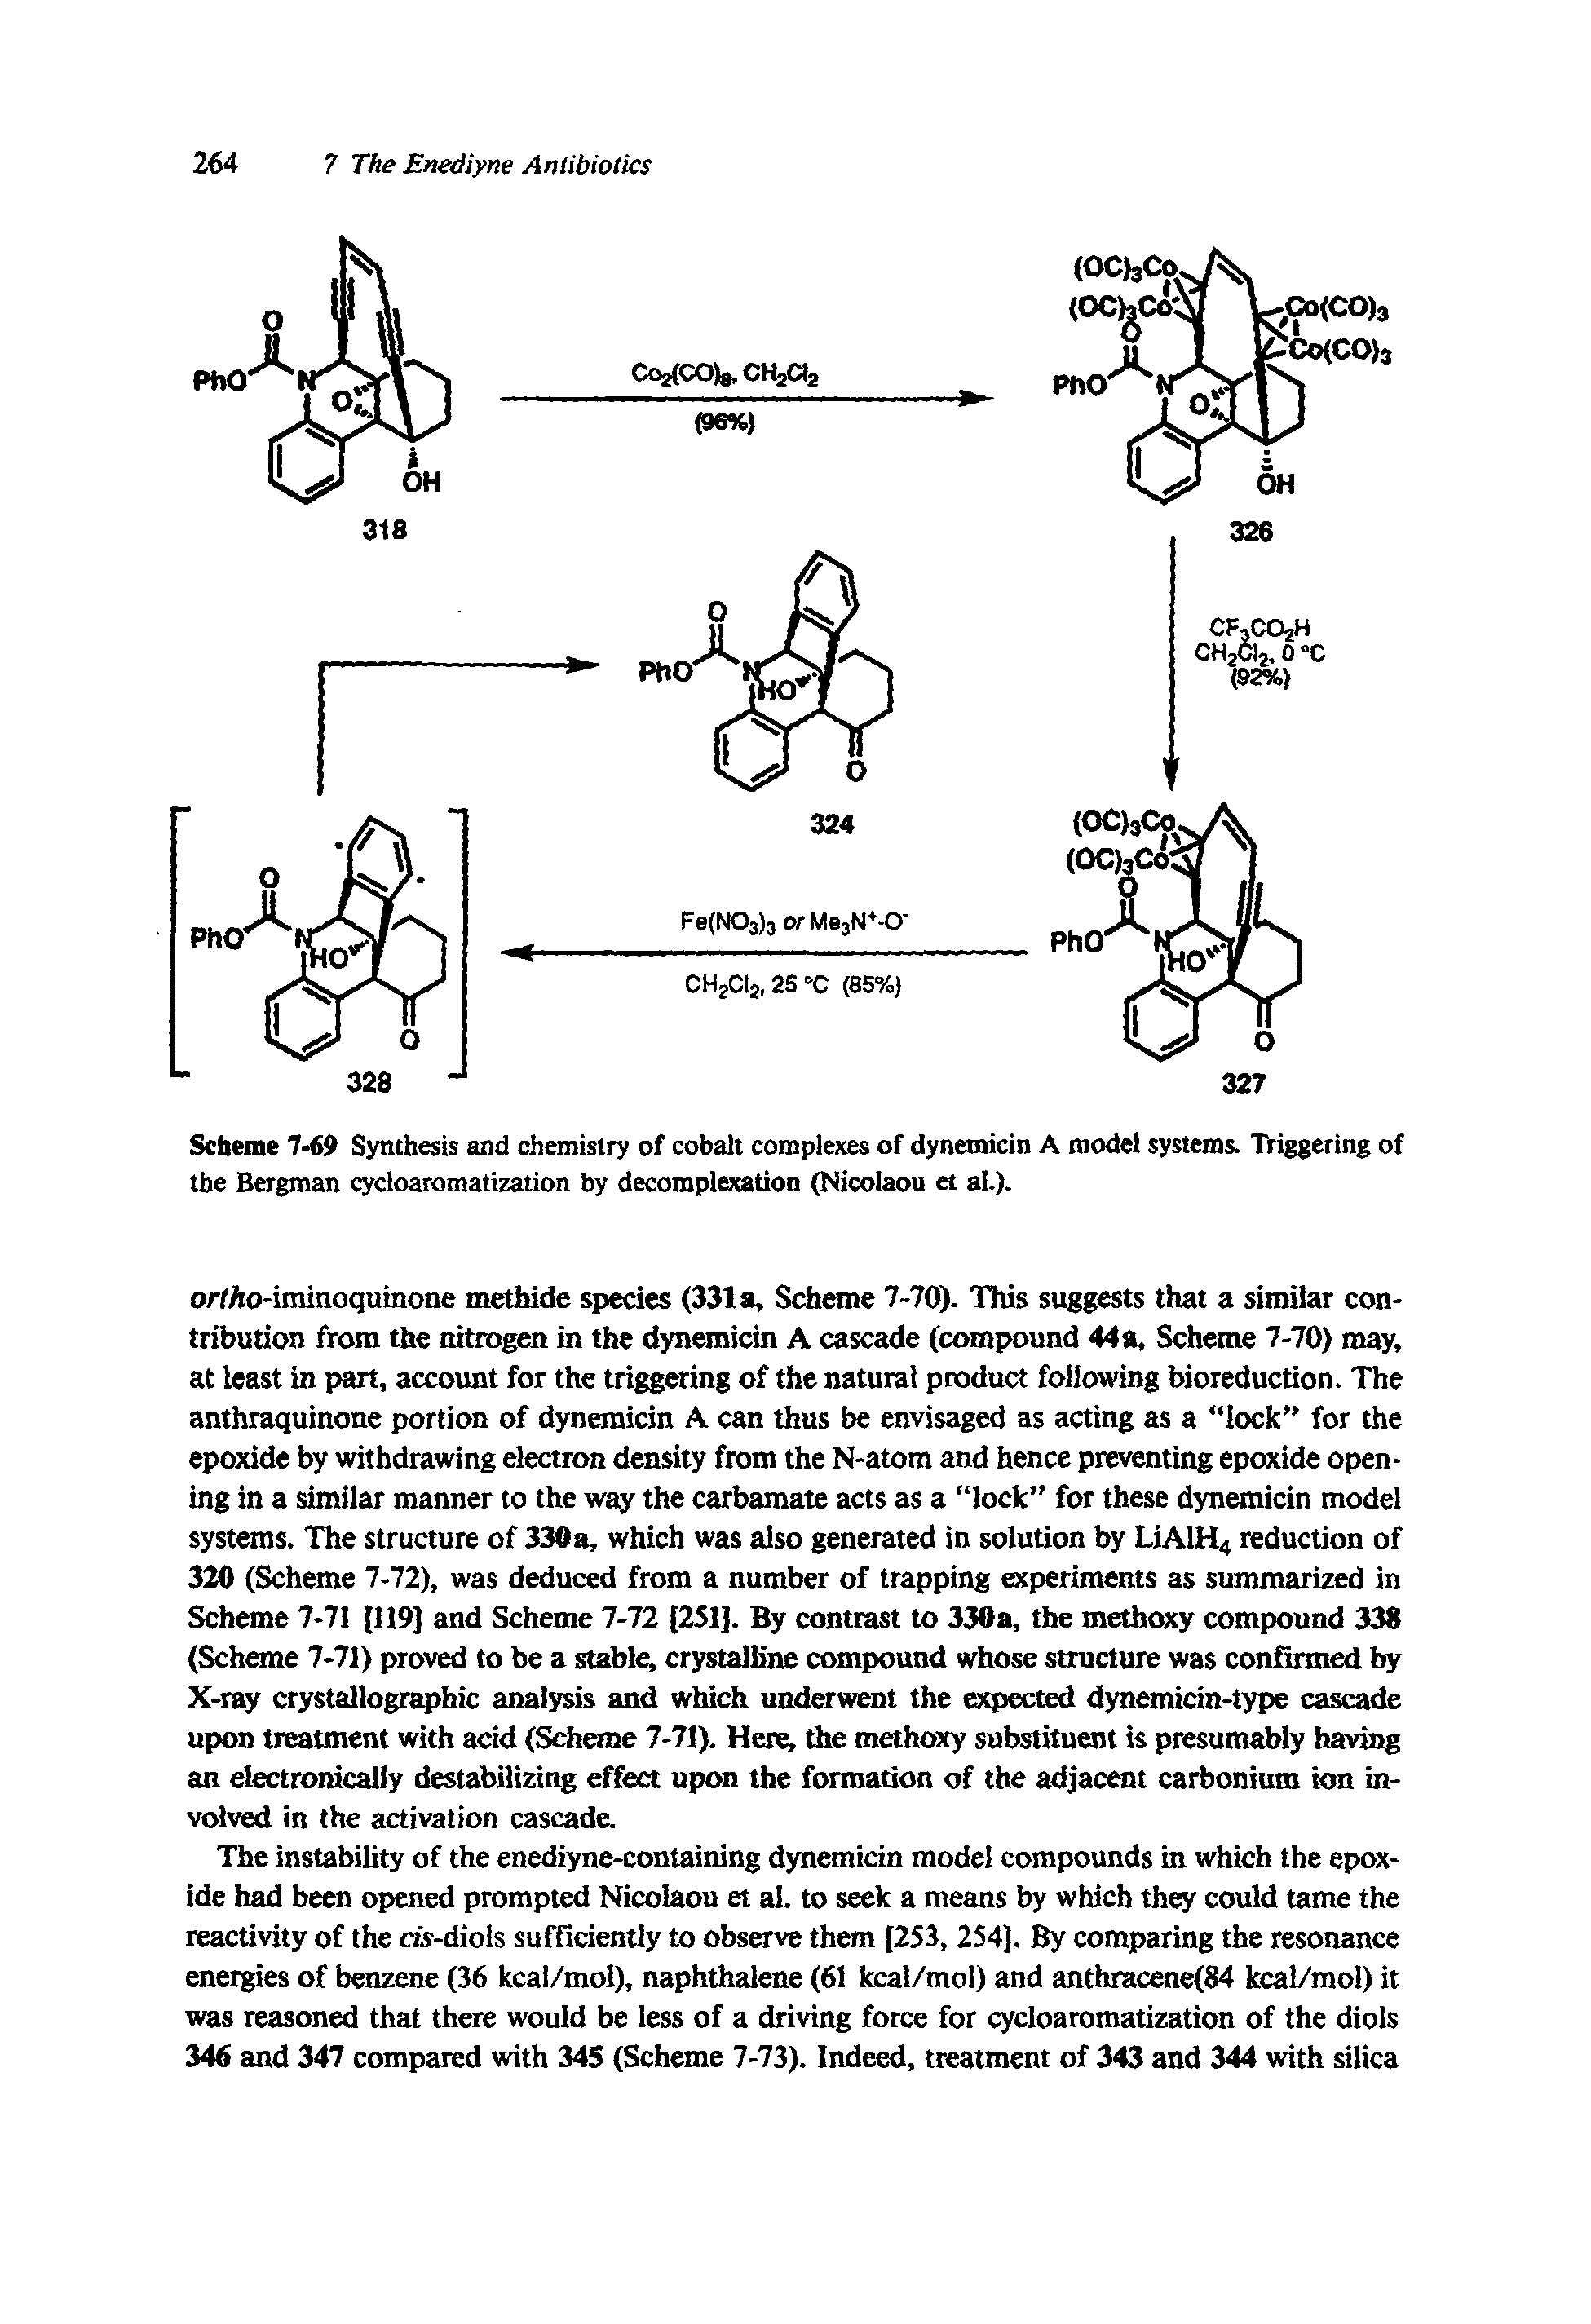 Scheme 7-69 Synthesis and chemistry of cobalt complexes of dynemicin A model systems. Triggering of the Bergman cycloaromatization by decomplexation (Nicolaou et al.).